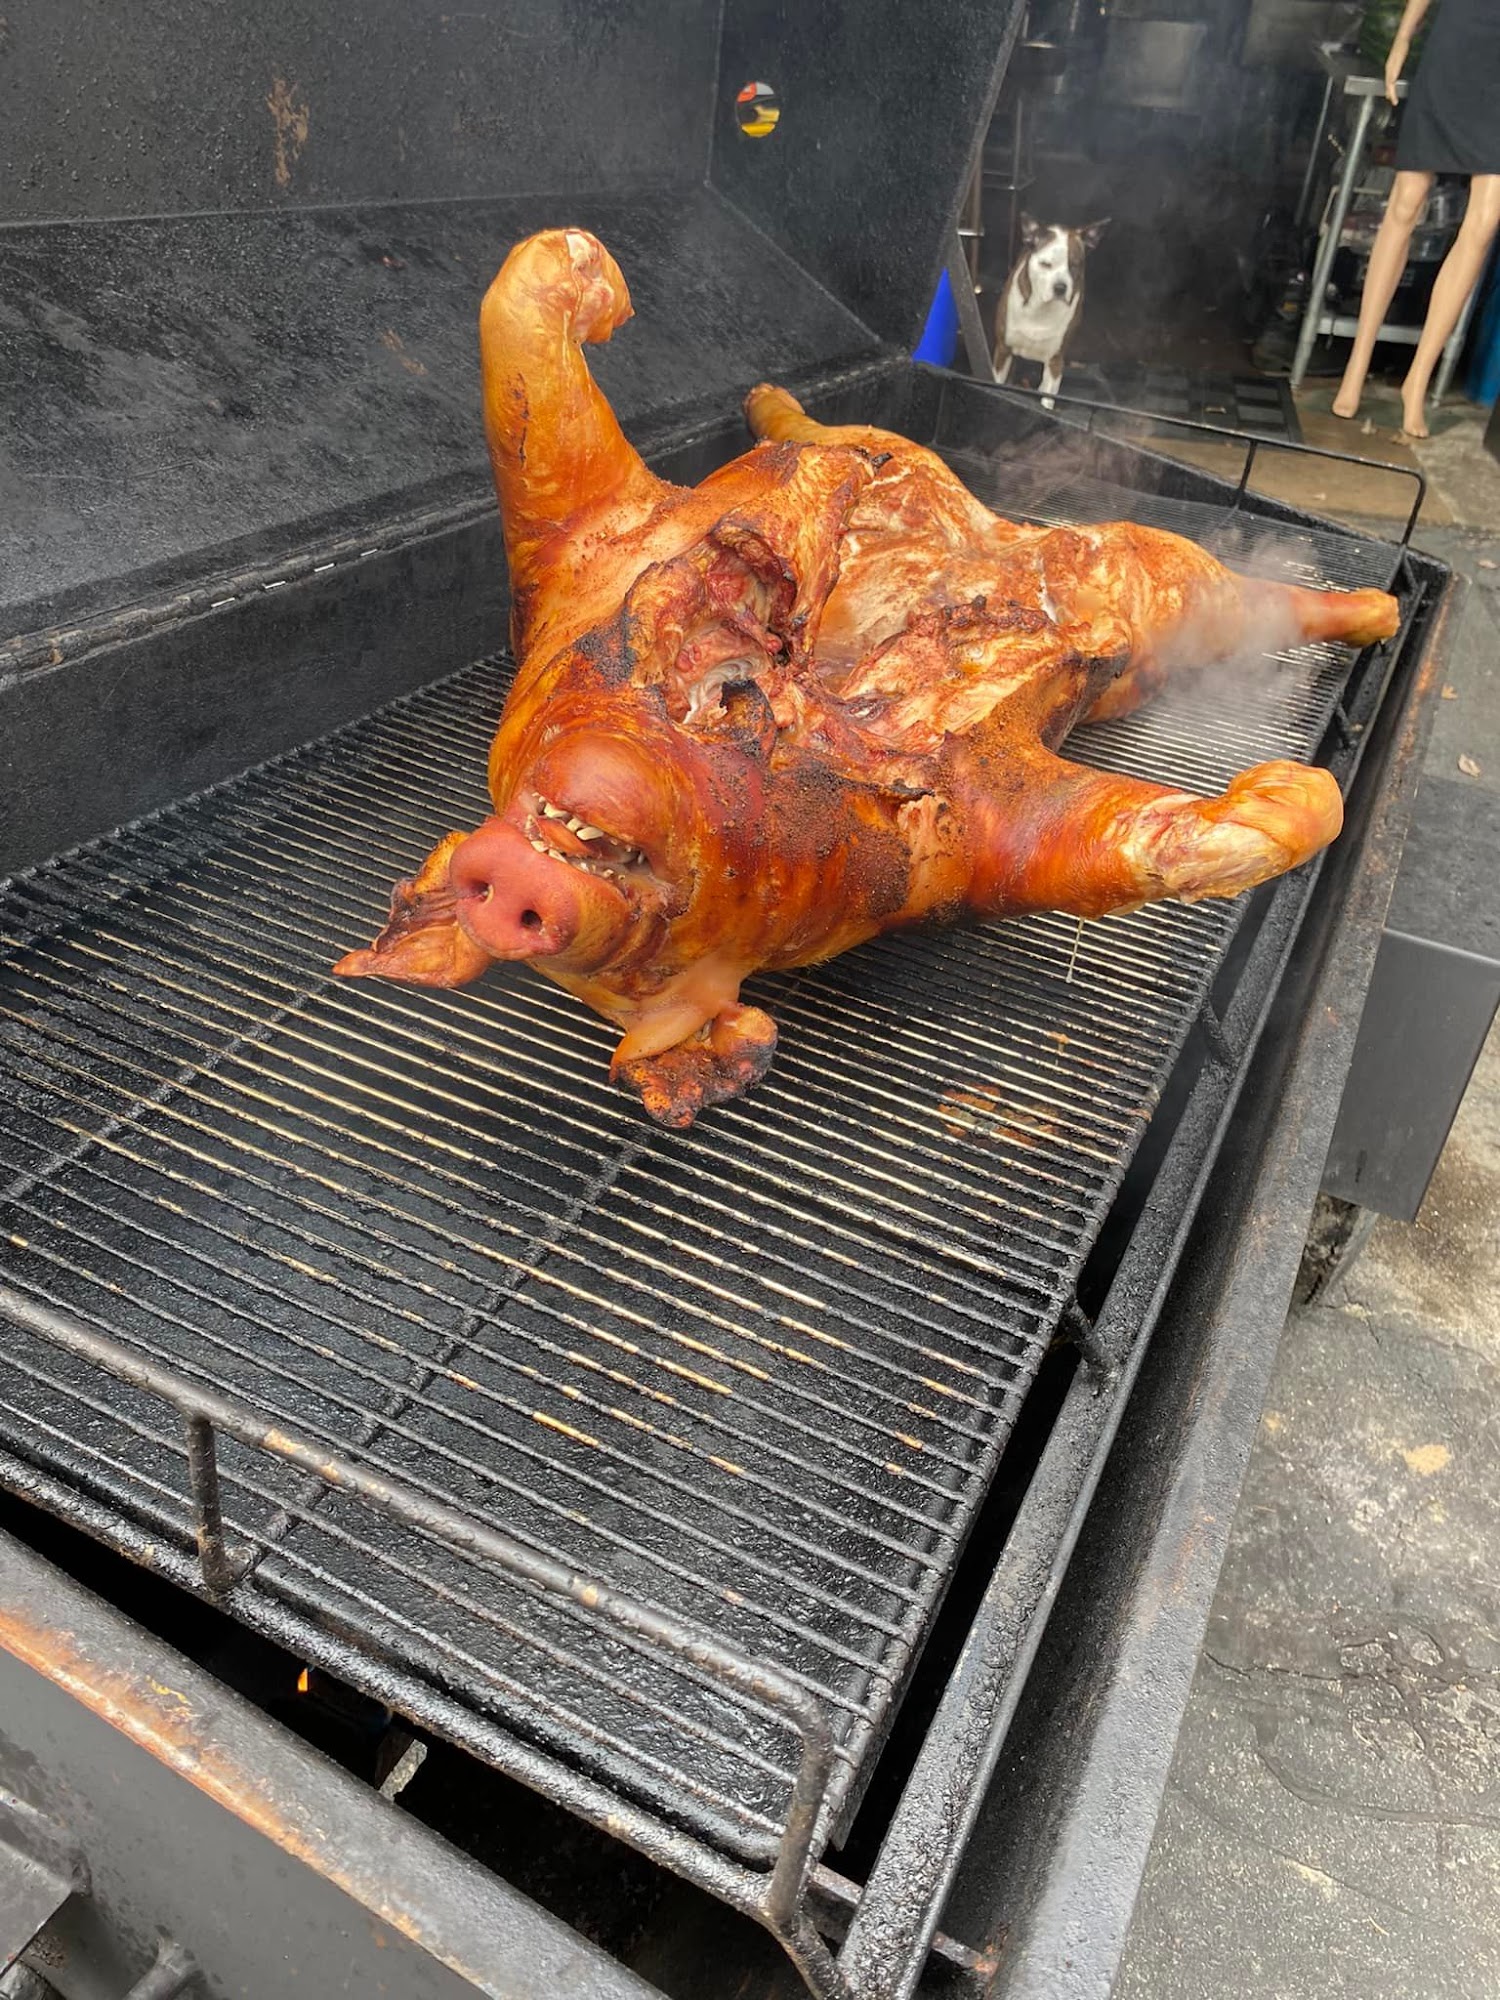 M A Catering & Pig Roasts- Roasting Pigs in CT